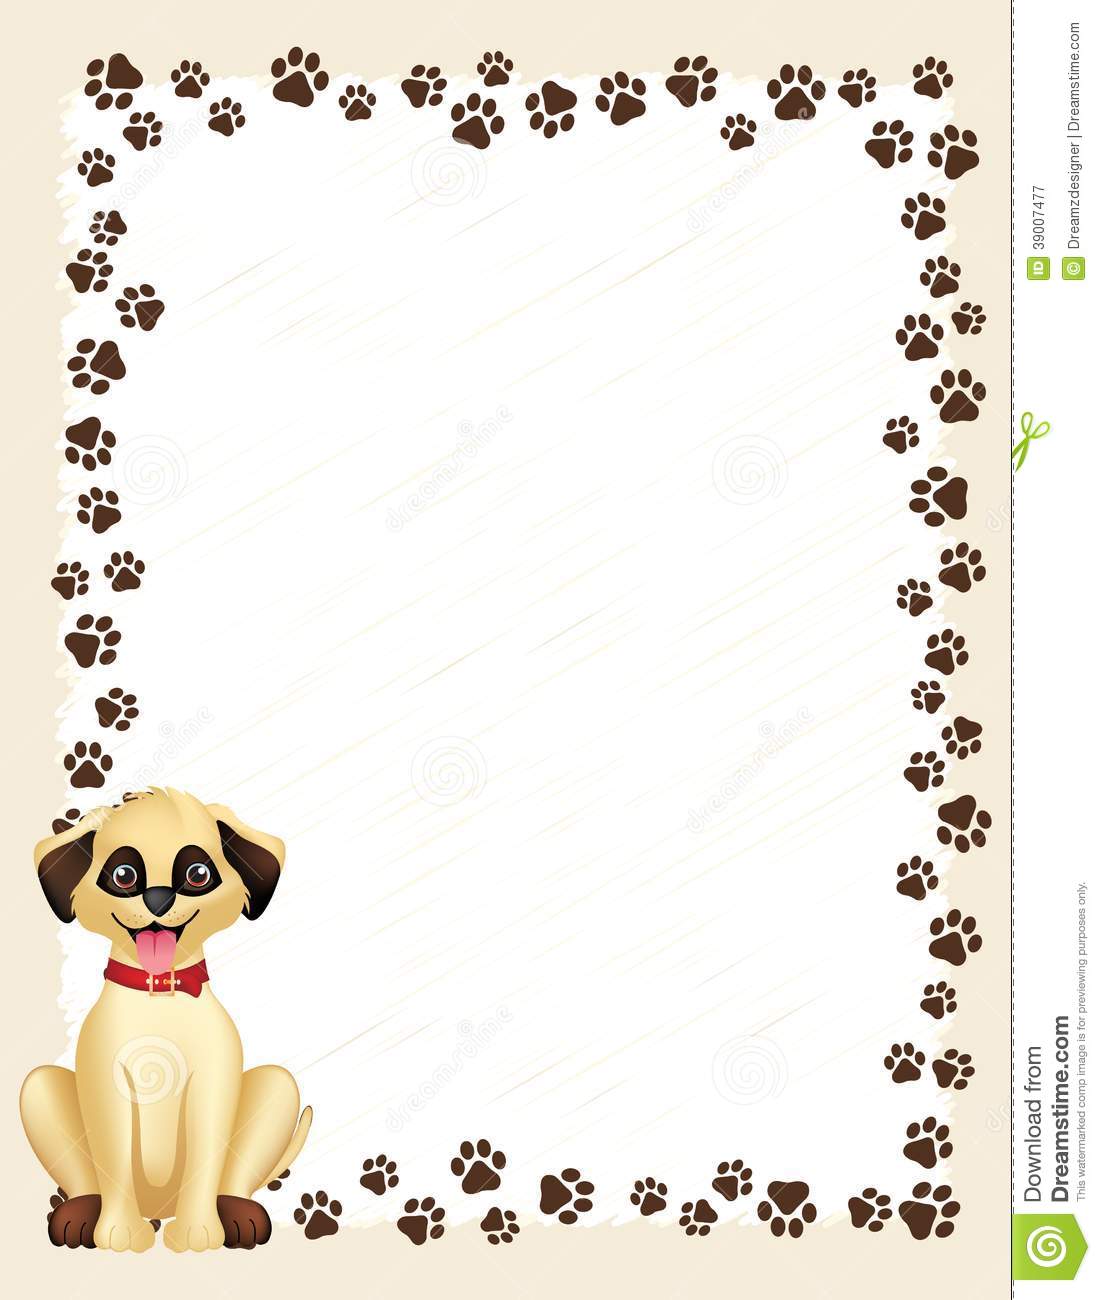 Cute Paw Print Background Prints Border With Dog